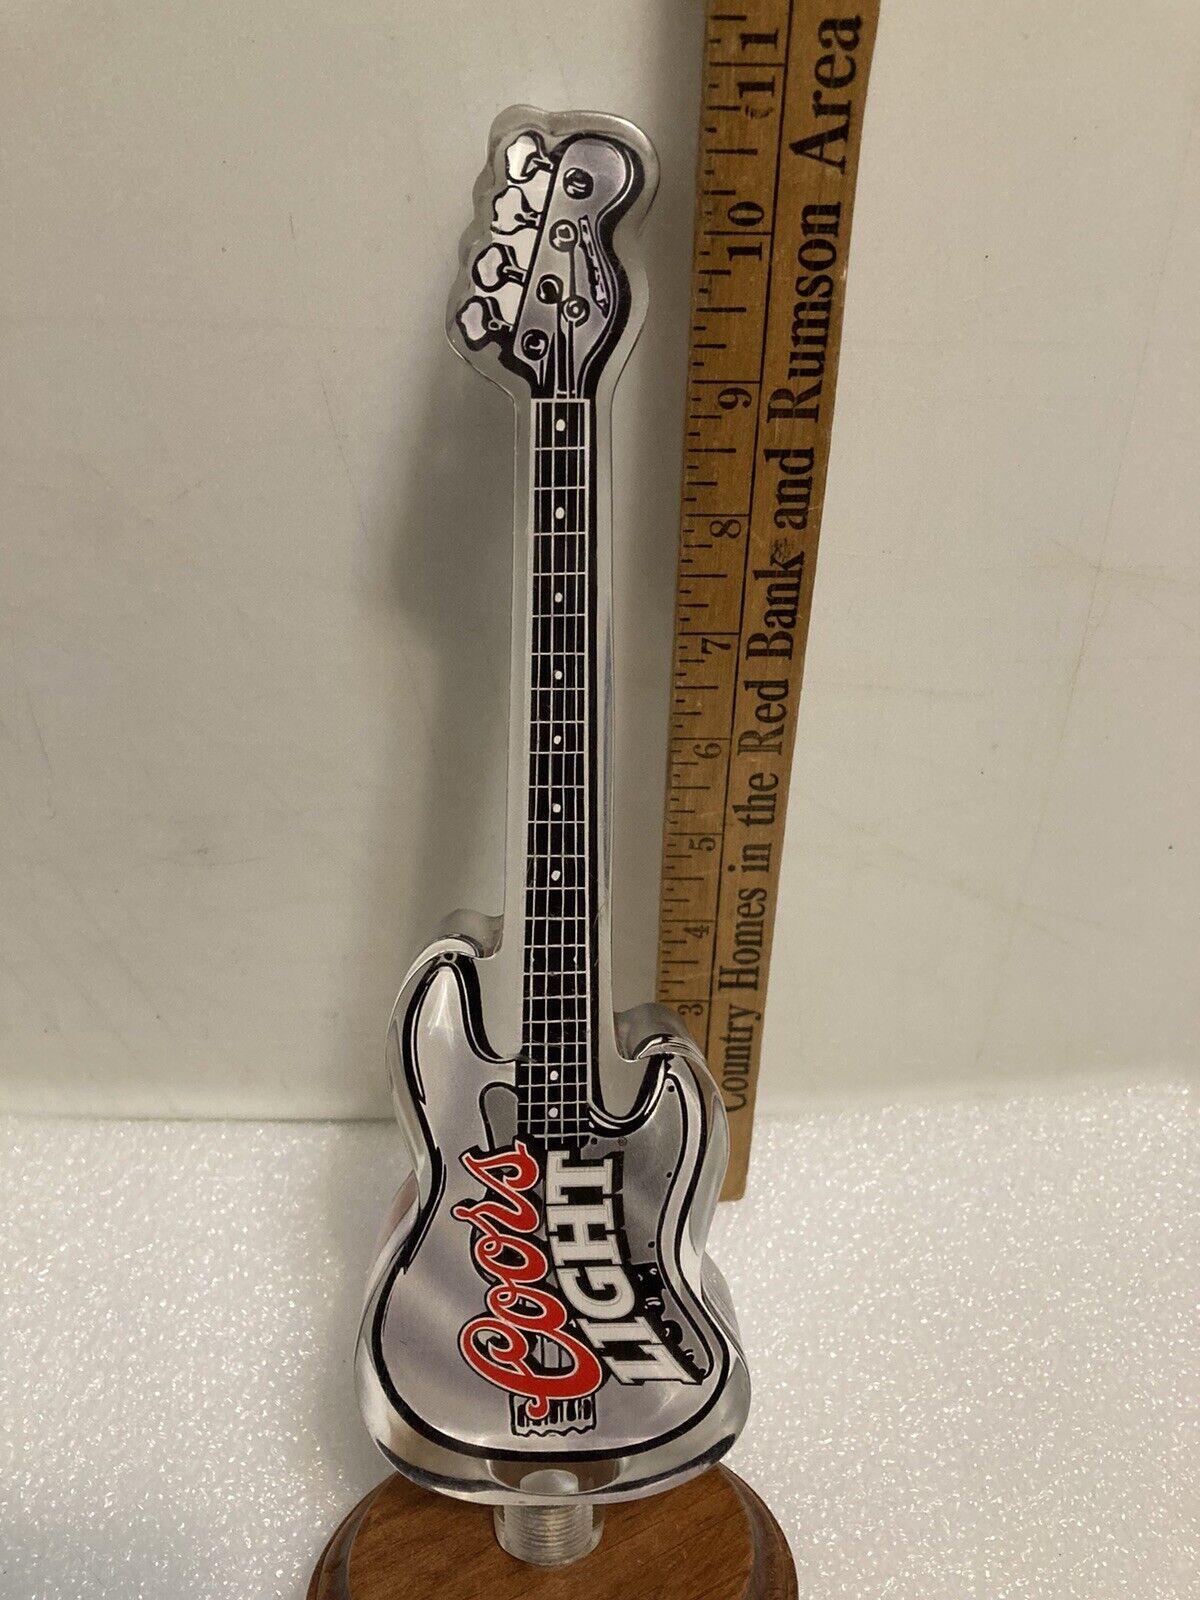 COORS LIGHT ELECTRIC 4-STRING BASS GUITAR draft beer tap handle. COLORADO